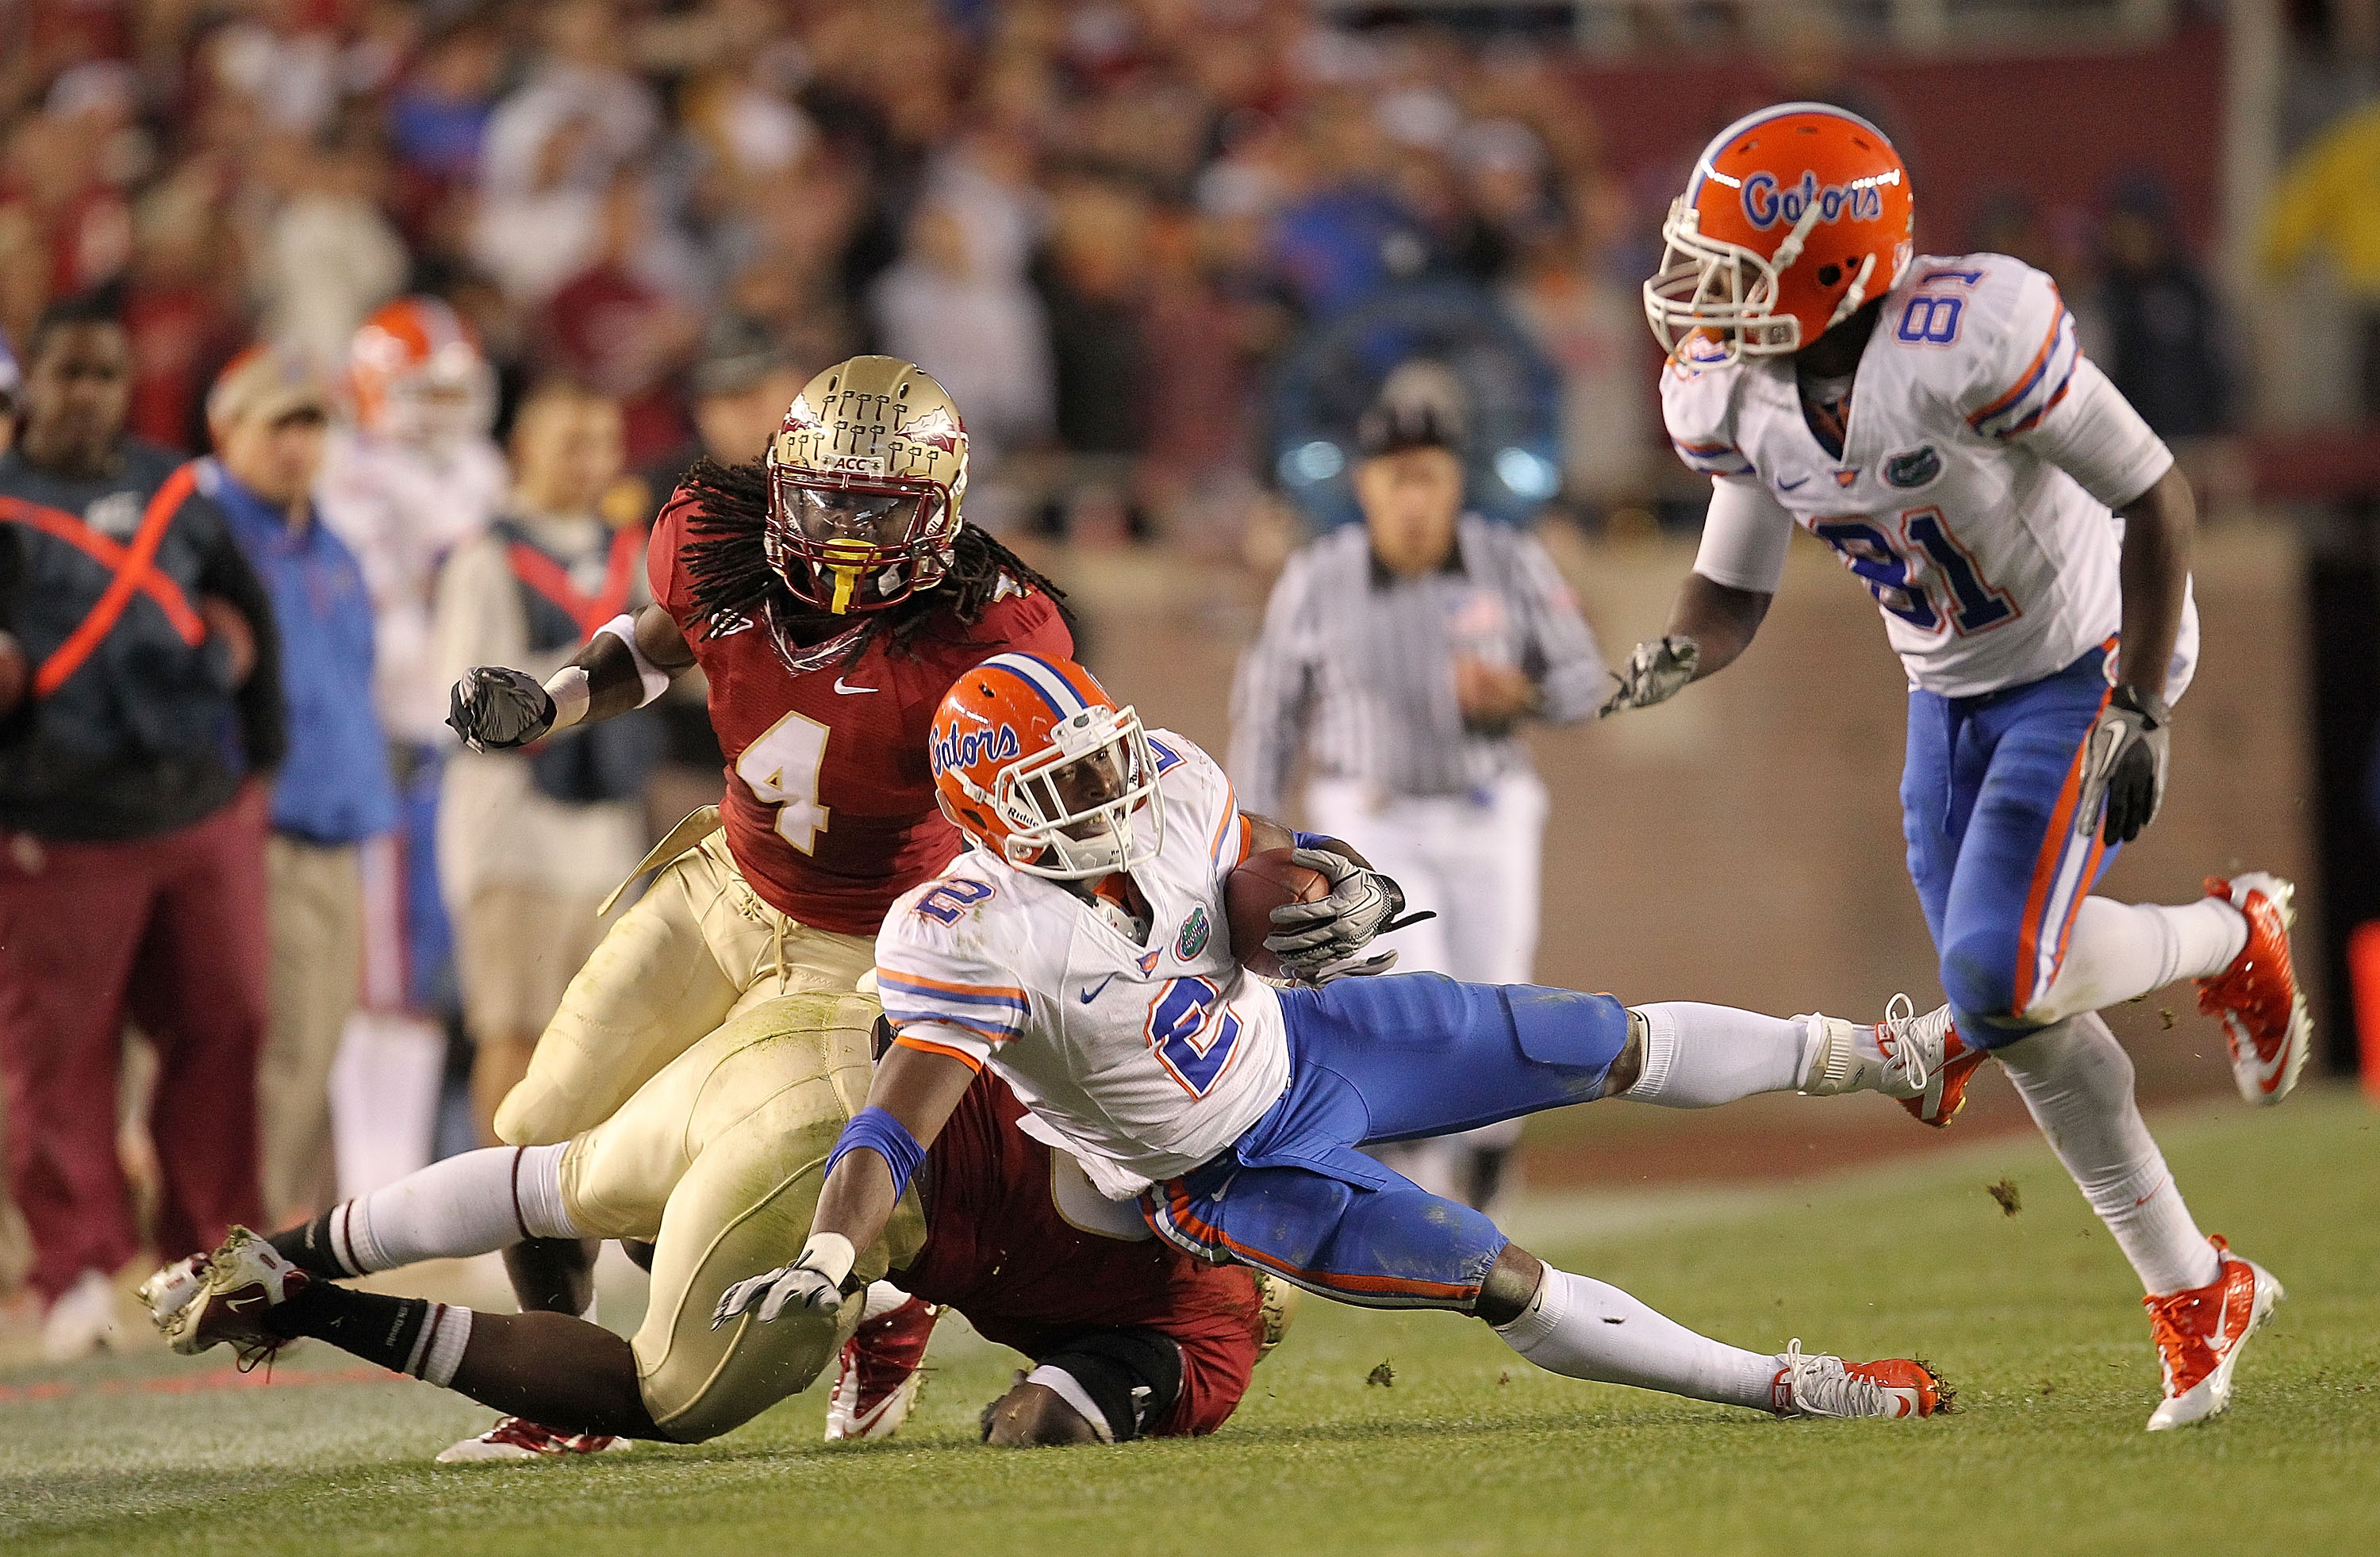 TALLAHASSEE, FL - NOVEMBER 27:  Jeff Demps #2 of the Florida Gators is tackled by Terrance Parks #4 of the Florida State Seminoles  during a game at Doak Campbell Stadium on November 27, 2010 in Tallahassee, Florida.  (Photo by Mike Ehrmann/Getty Images)